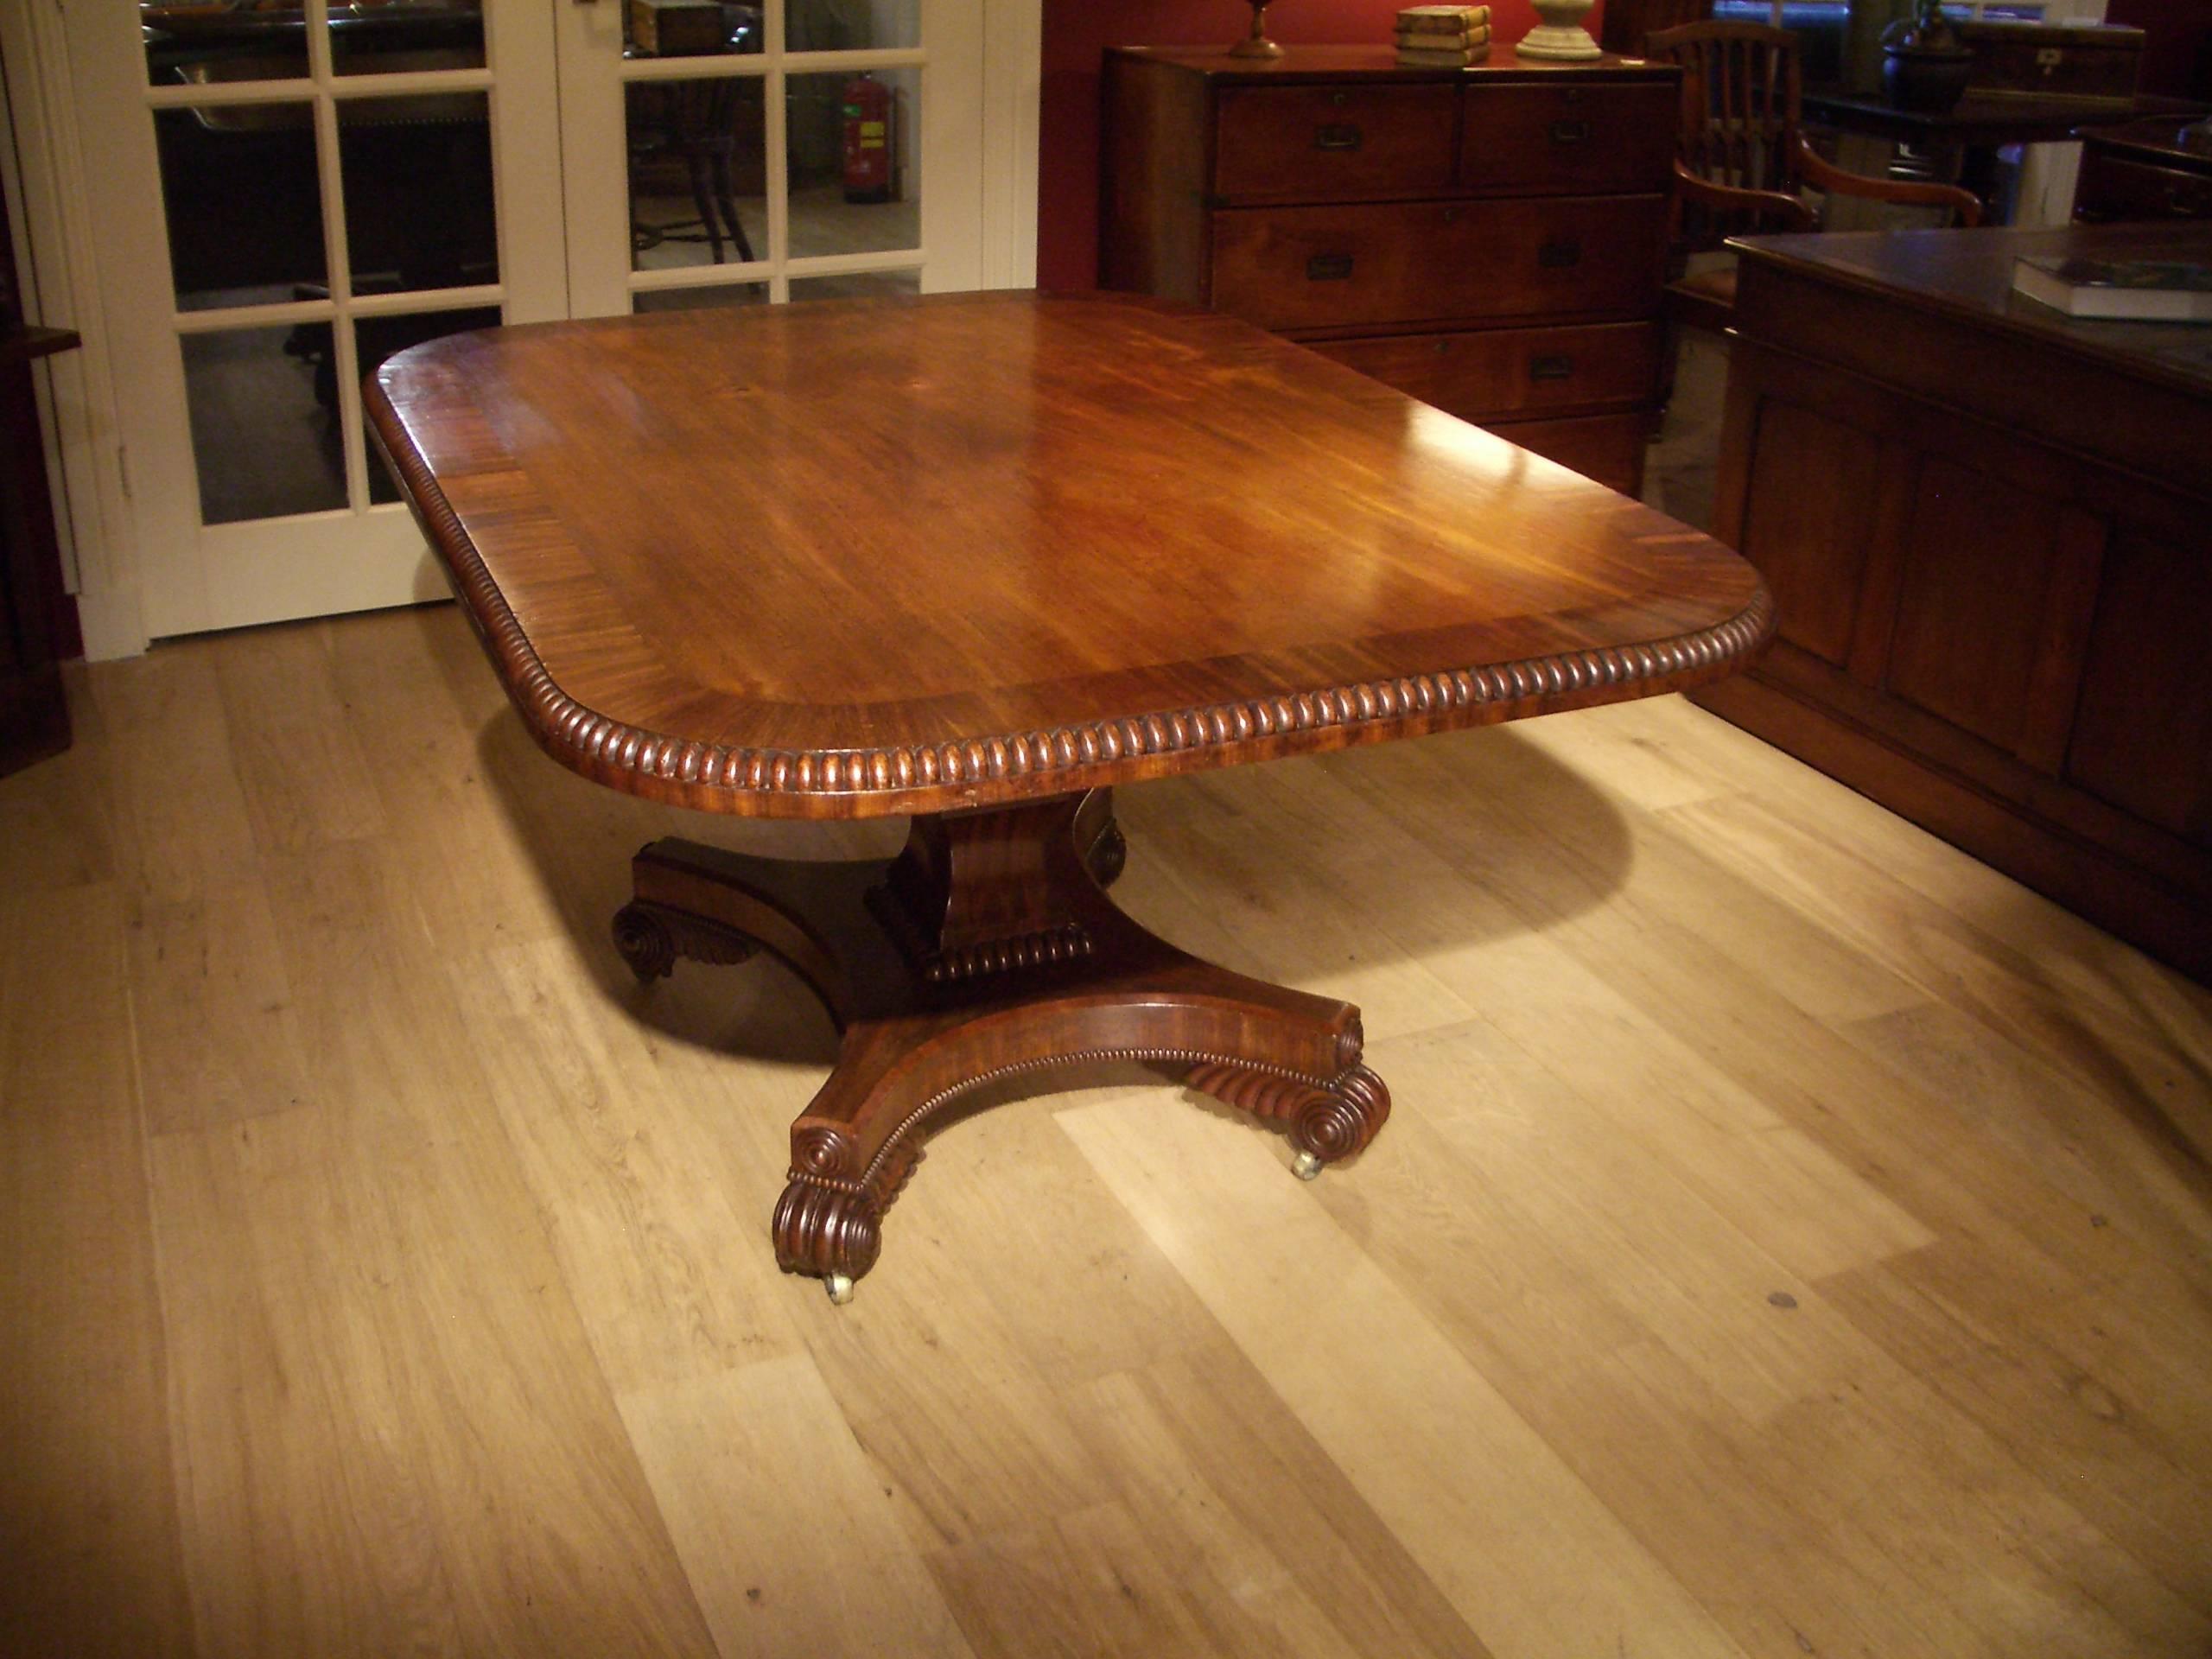 A fine quality William IV tilt-top breakfast, or supper, dining table. Made from a fine grade of solid mahogany with attractive veneers in the crossbanding to the top. It has a great depth of color and rich patina. The top edge and column are